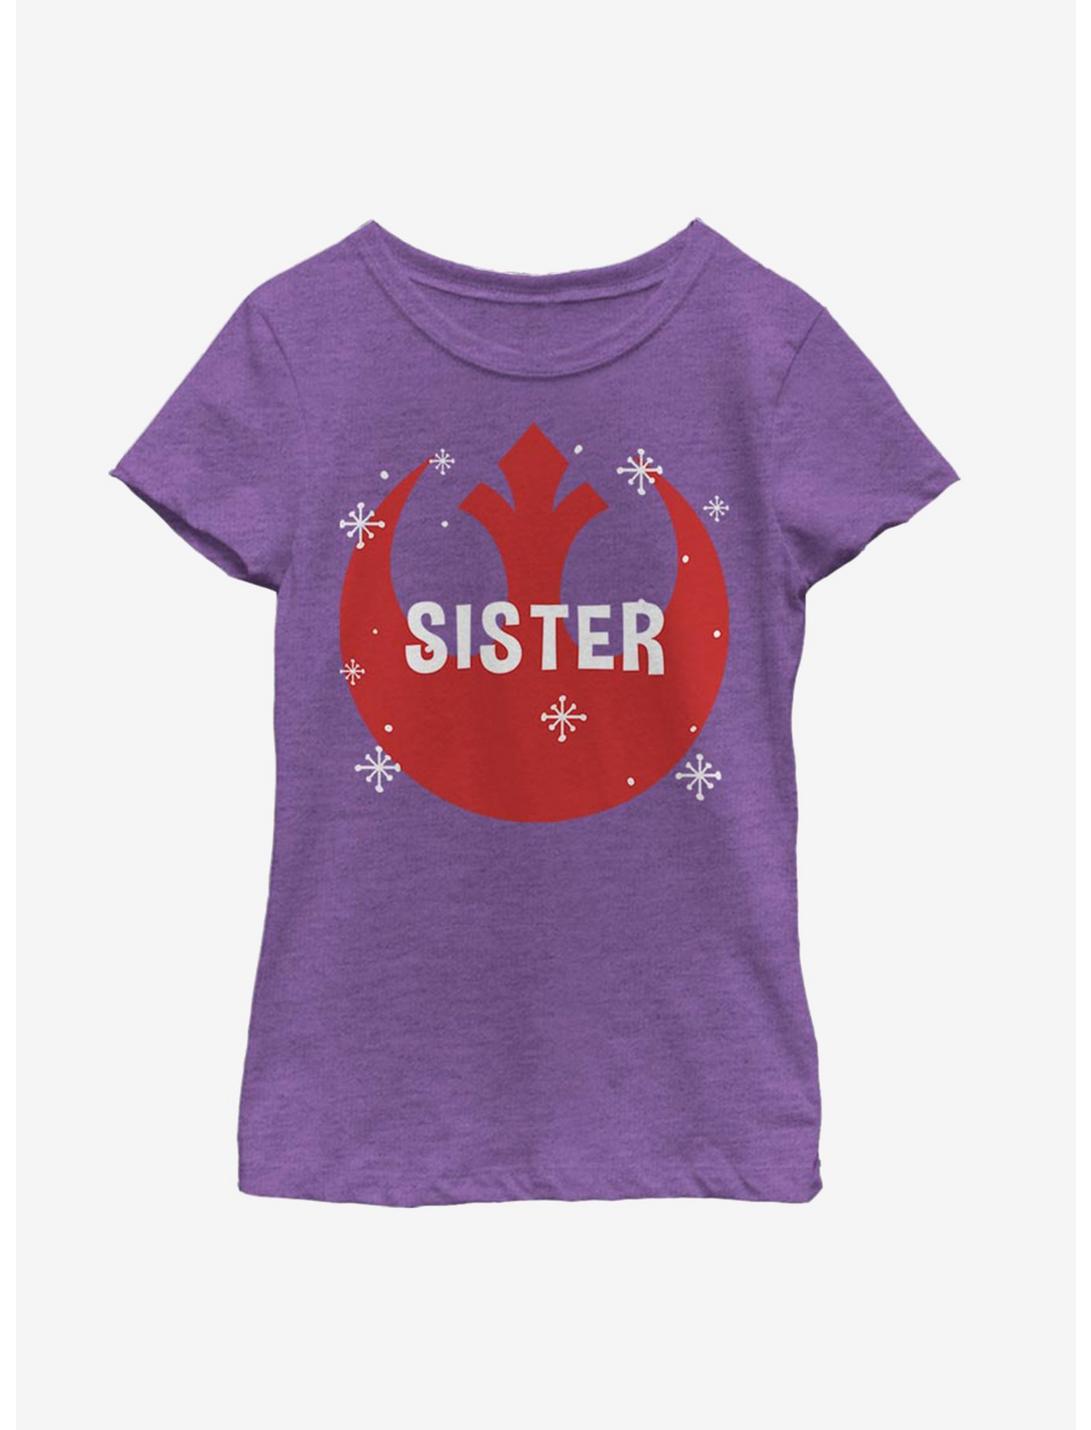 Star Wars Overlay Sister Youth Girls T-Shirt, PURPLE BERRY, hi-res